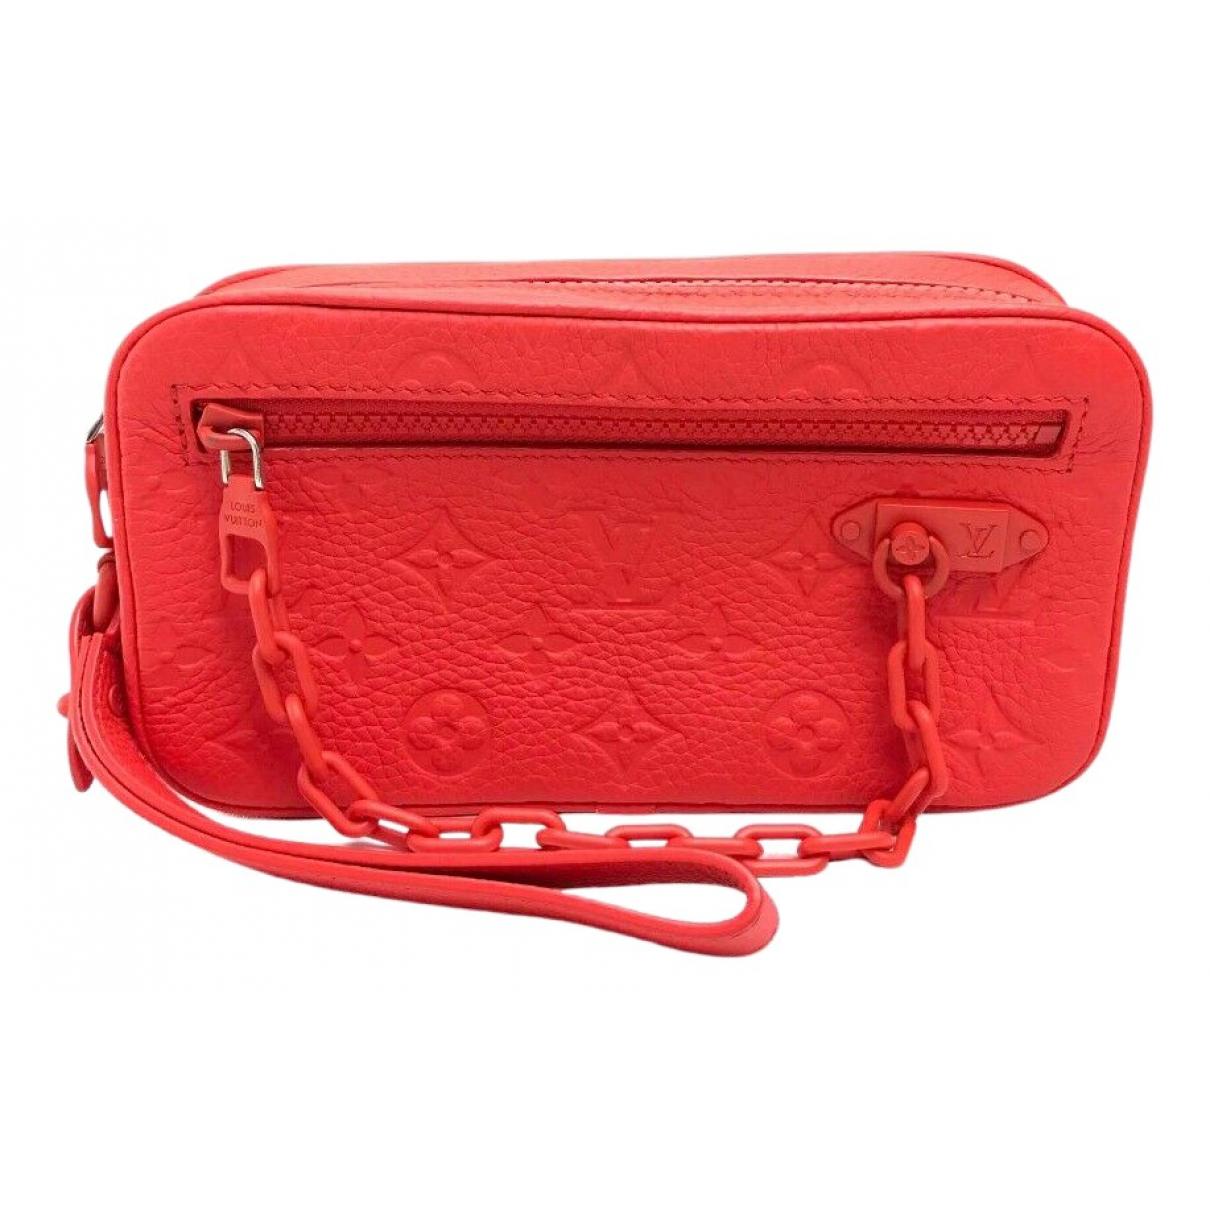 Louis Vuitton Leather Small Bag in Red for Men - Lyst